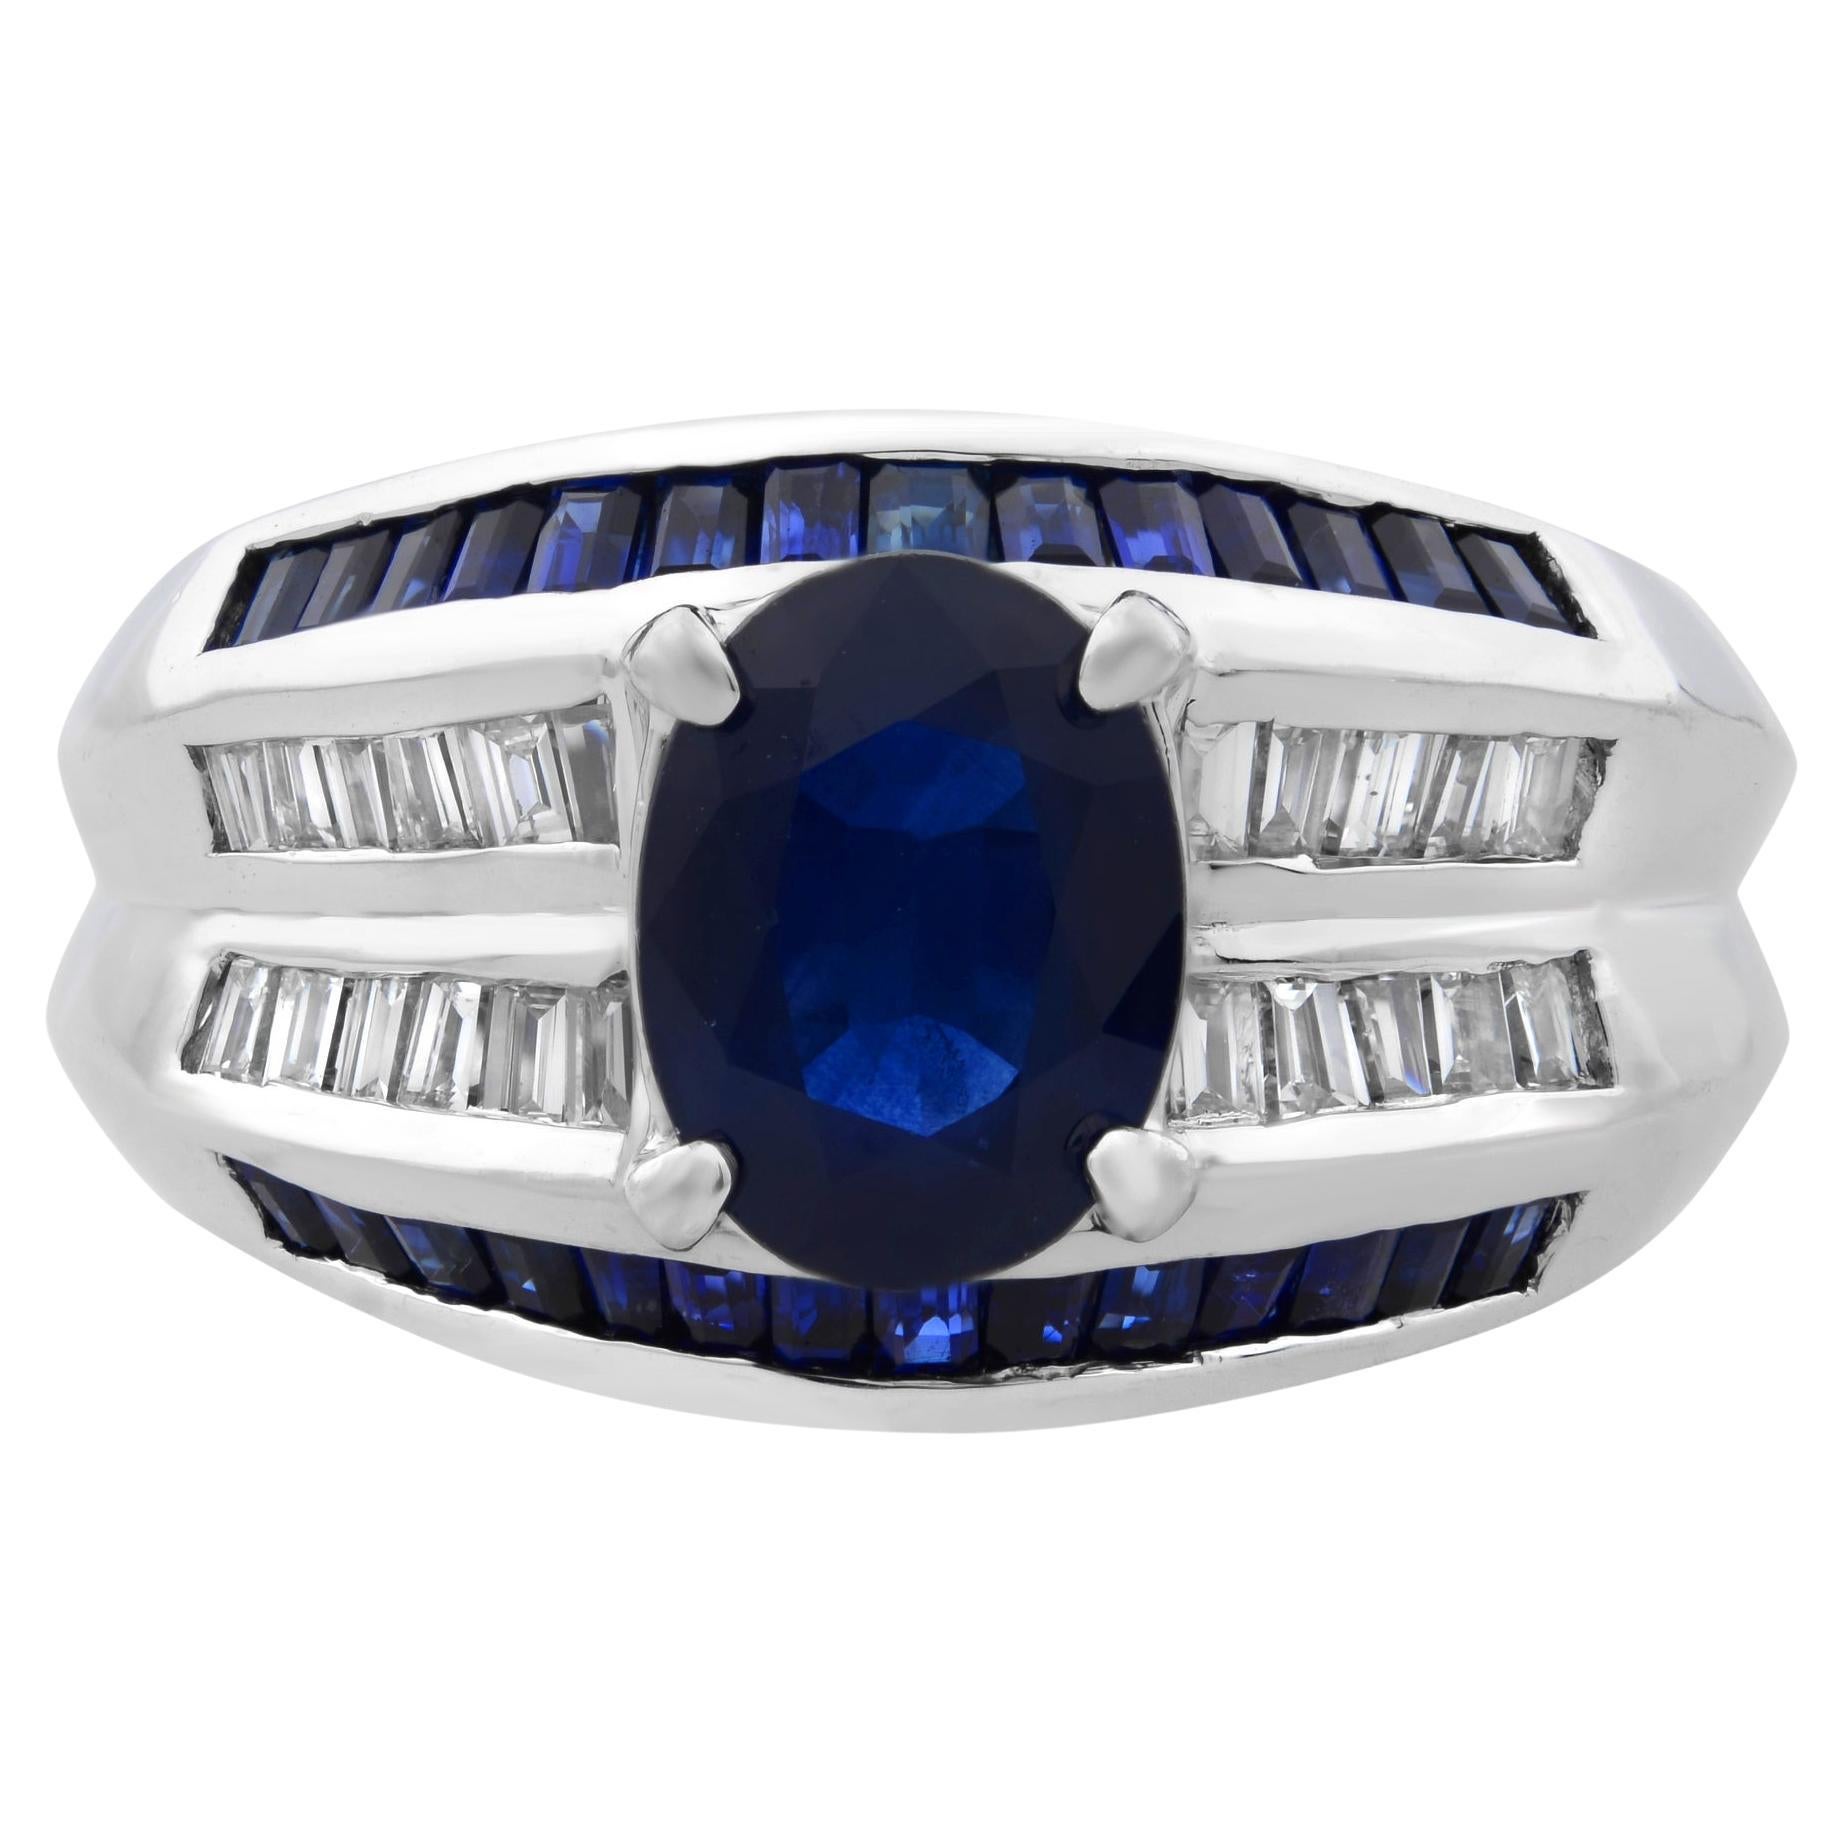 2.70Cttw Blue Sapphire & 0.45Cttw Diamond Cocktail Ring 14K White Gold For Sale